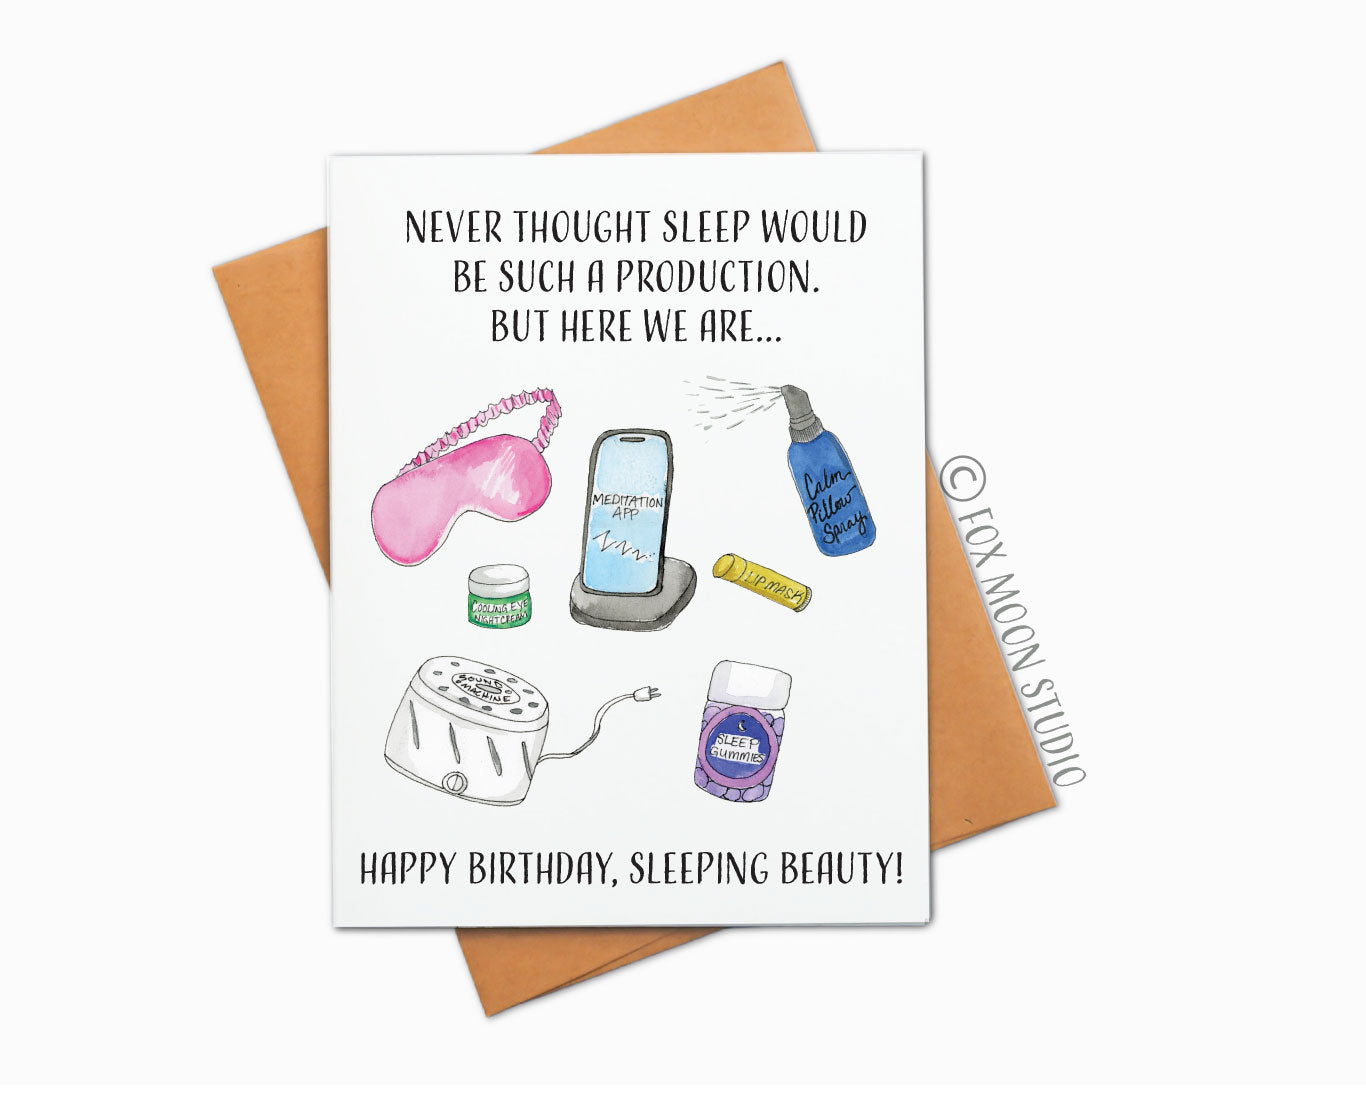 Never Thought Sleep Would Be Such A Production. But Here We Are... Happy Birthday, Sleeping Beauty!  - Humor Birthday Greeting Card